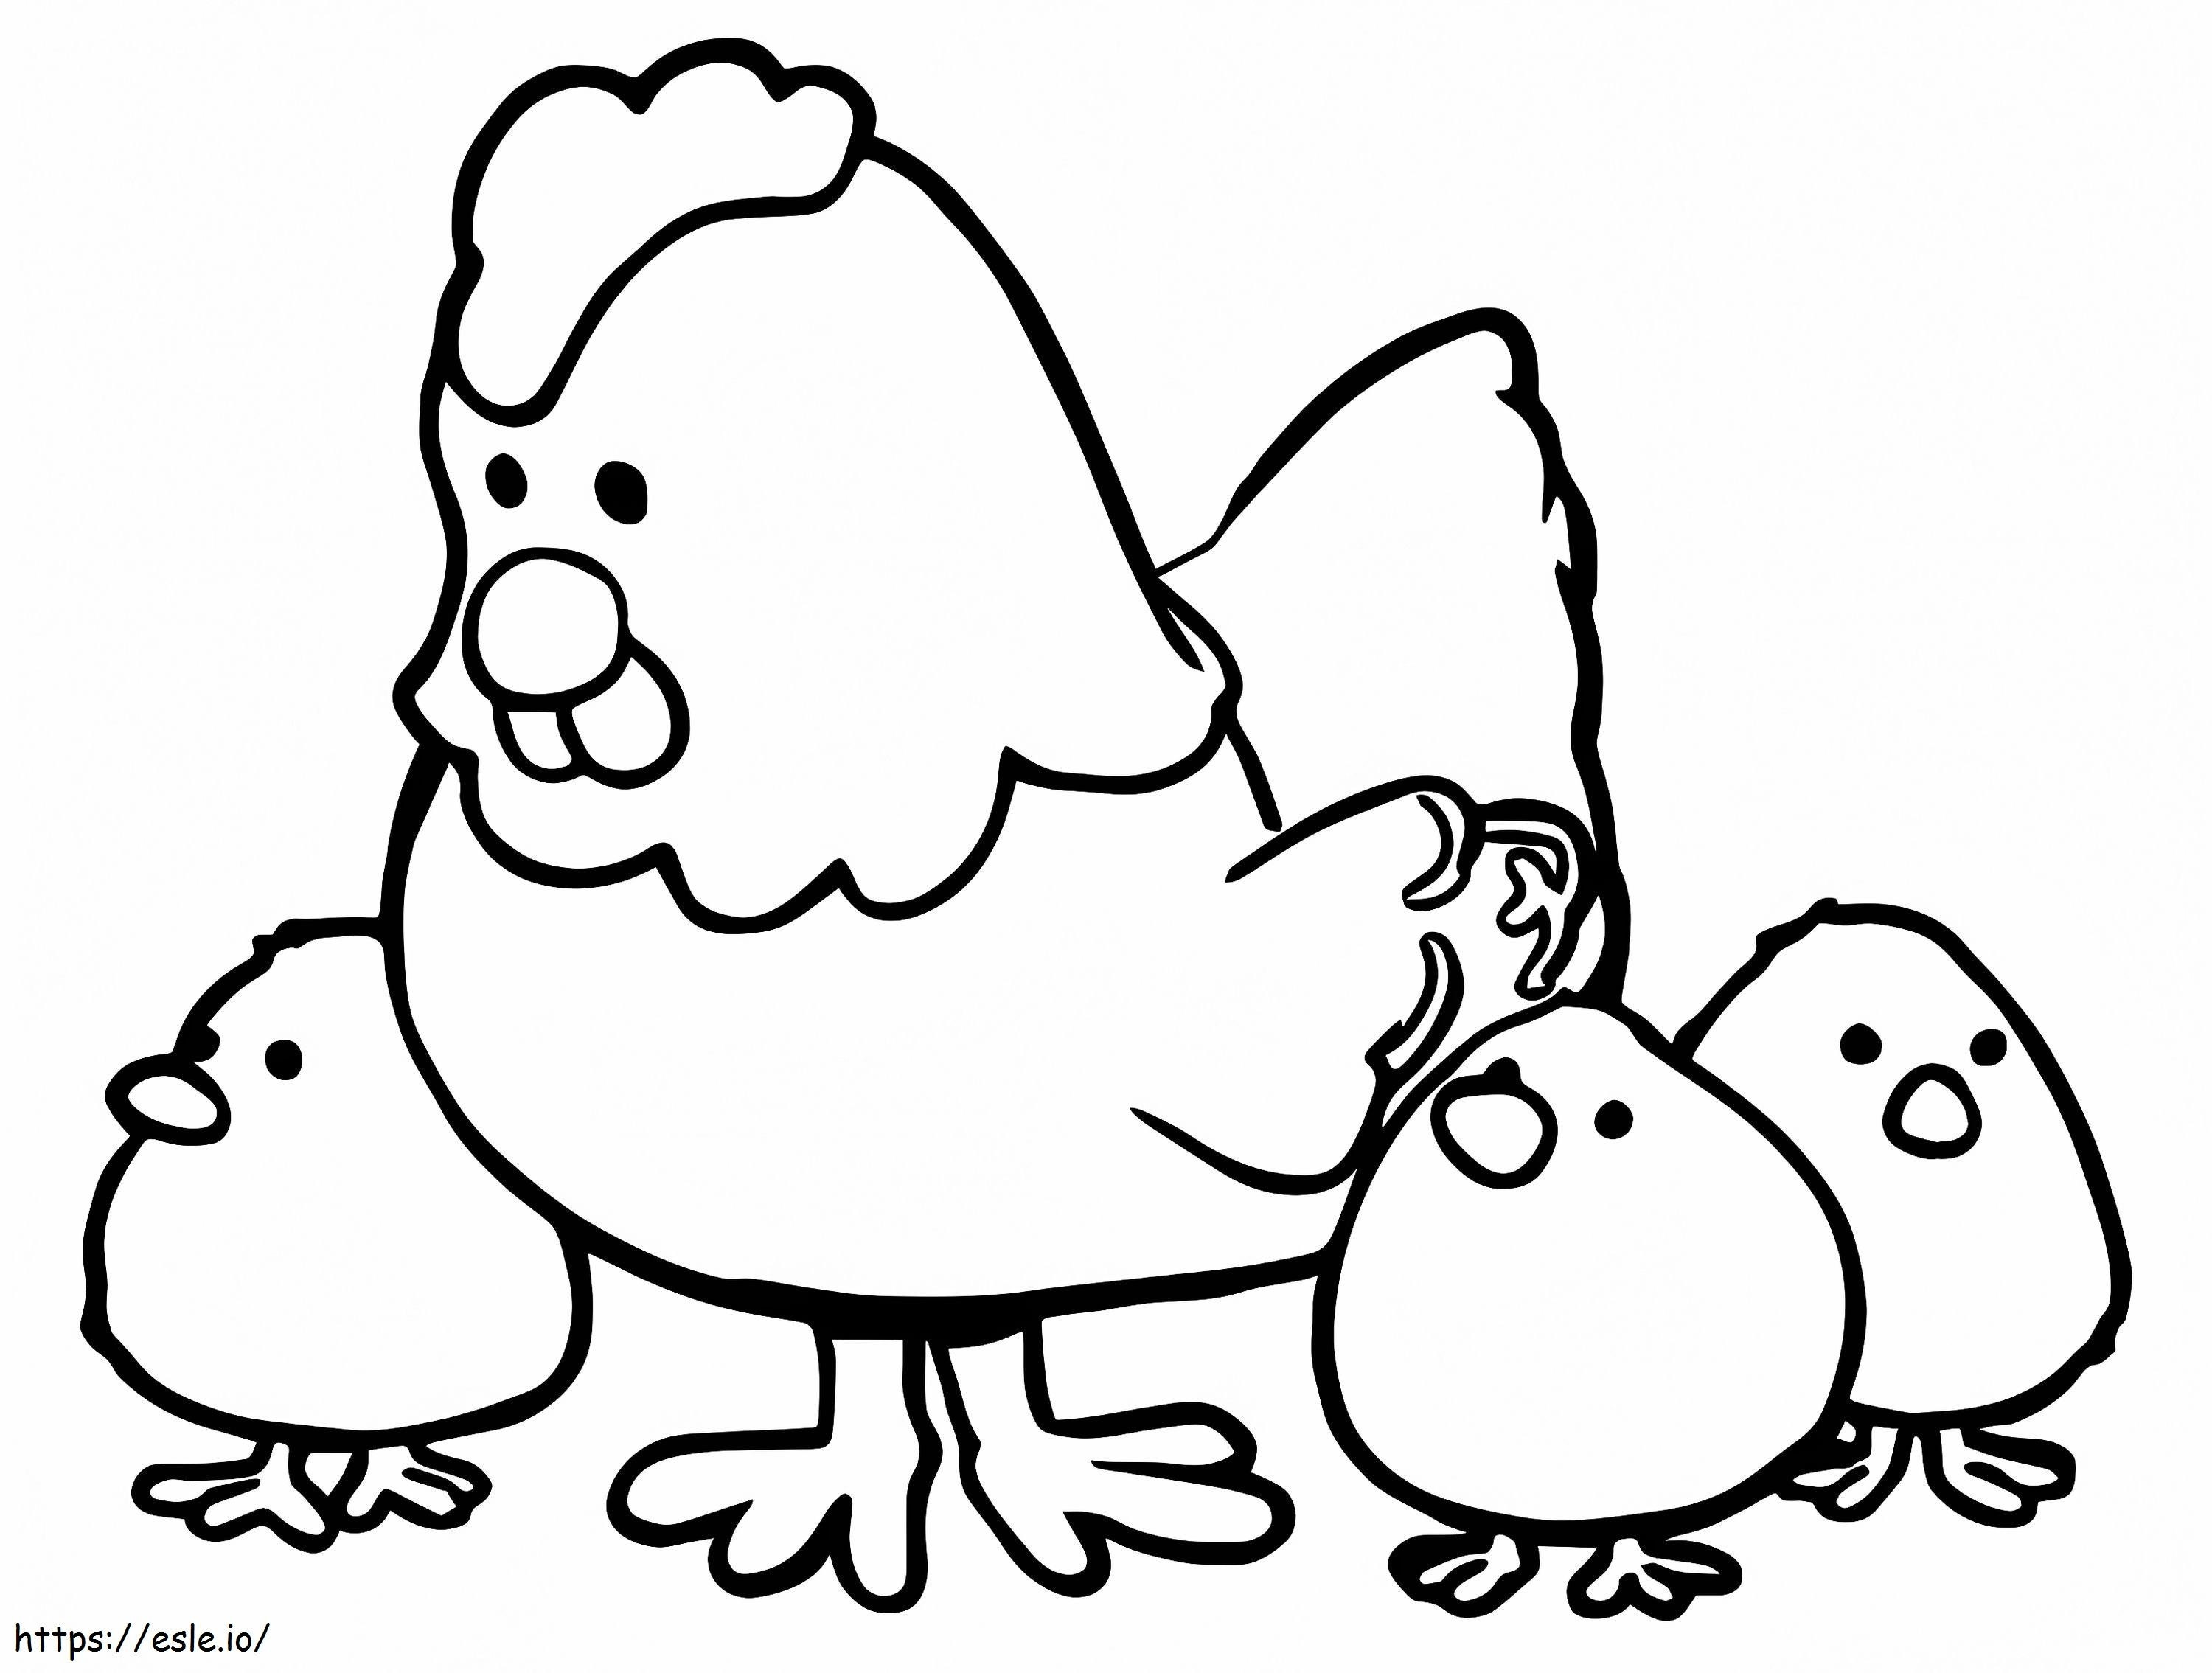 1570526950 Hen And Chicks Cartoon coloring page